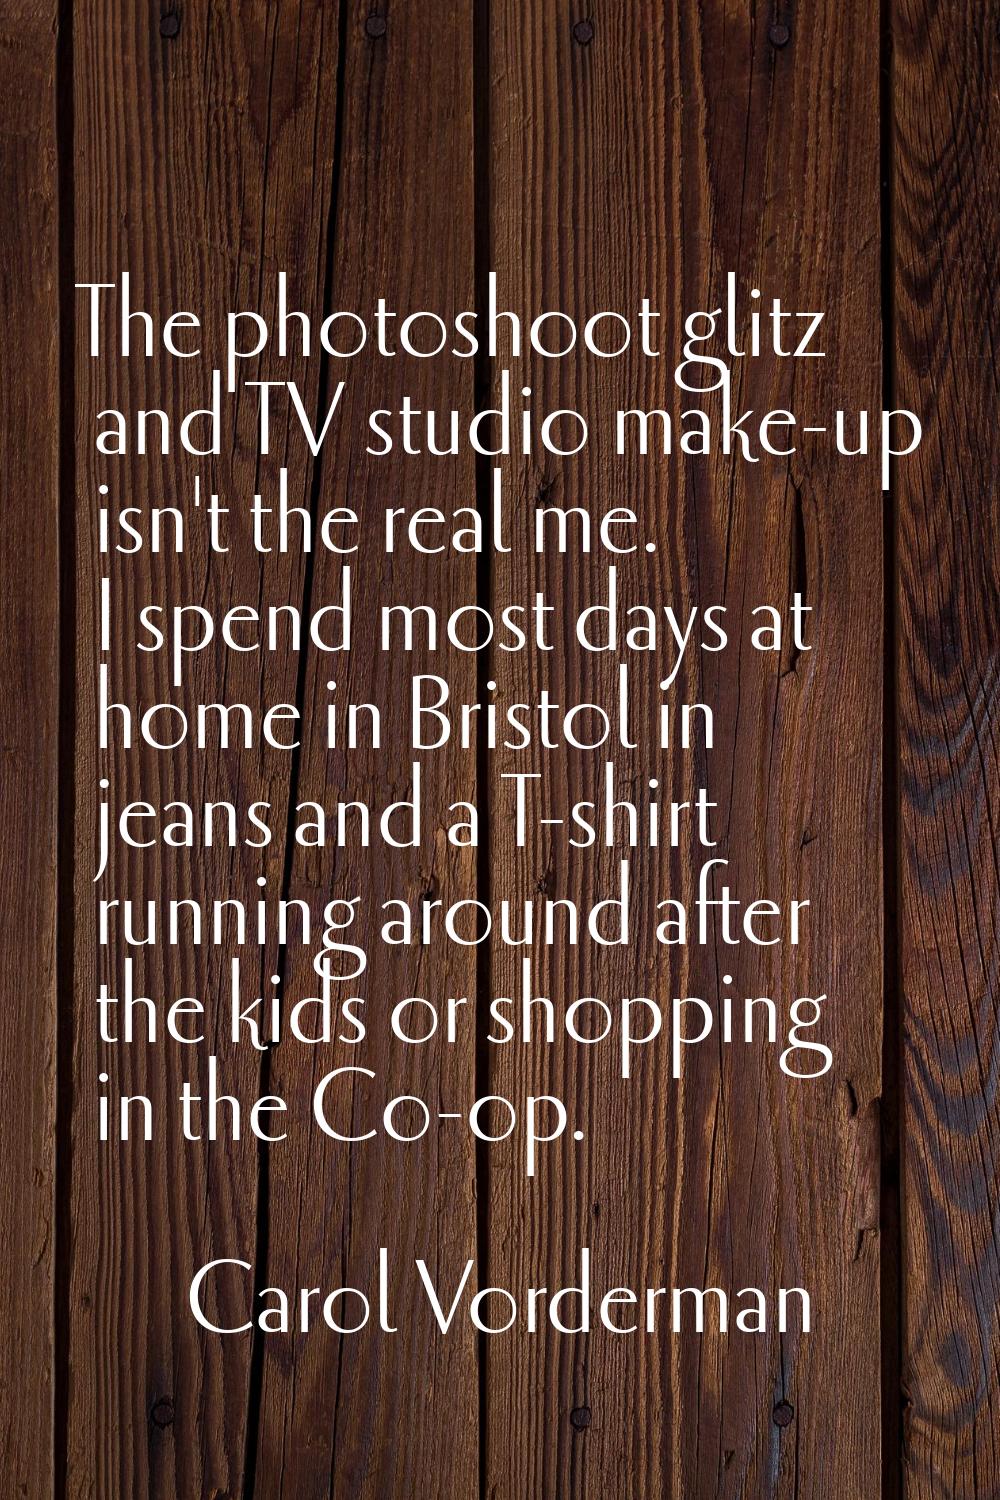 The photoshoot glitz and TV studio make-up isn't the real me. I spend most days at home in Bristol 